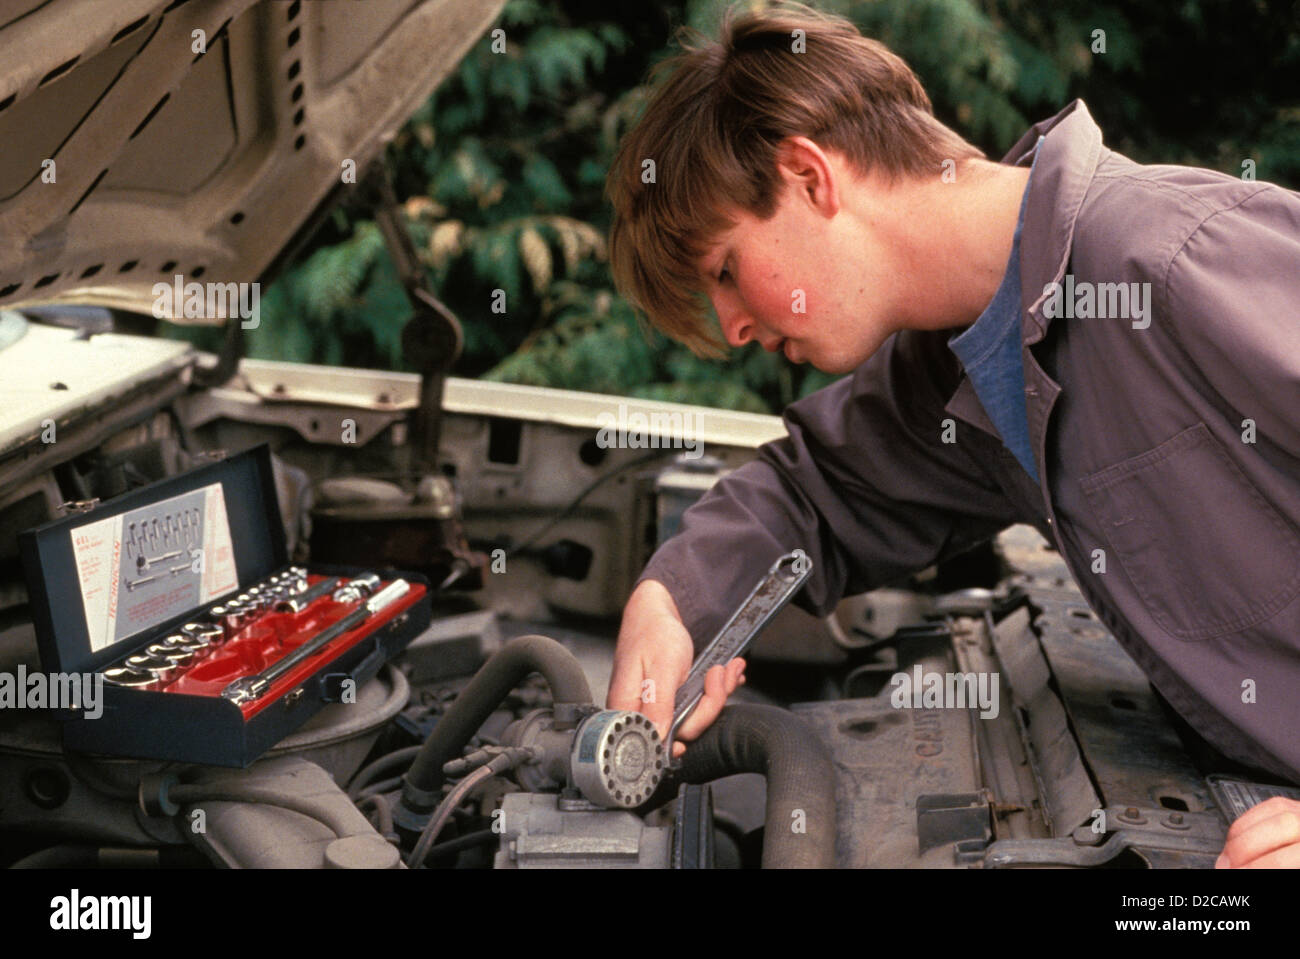 Male Working On Car Engine Stock Photo